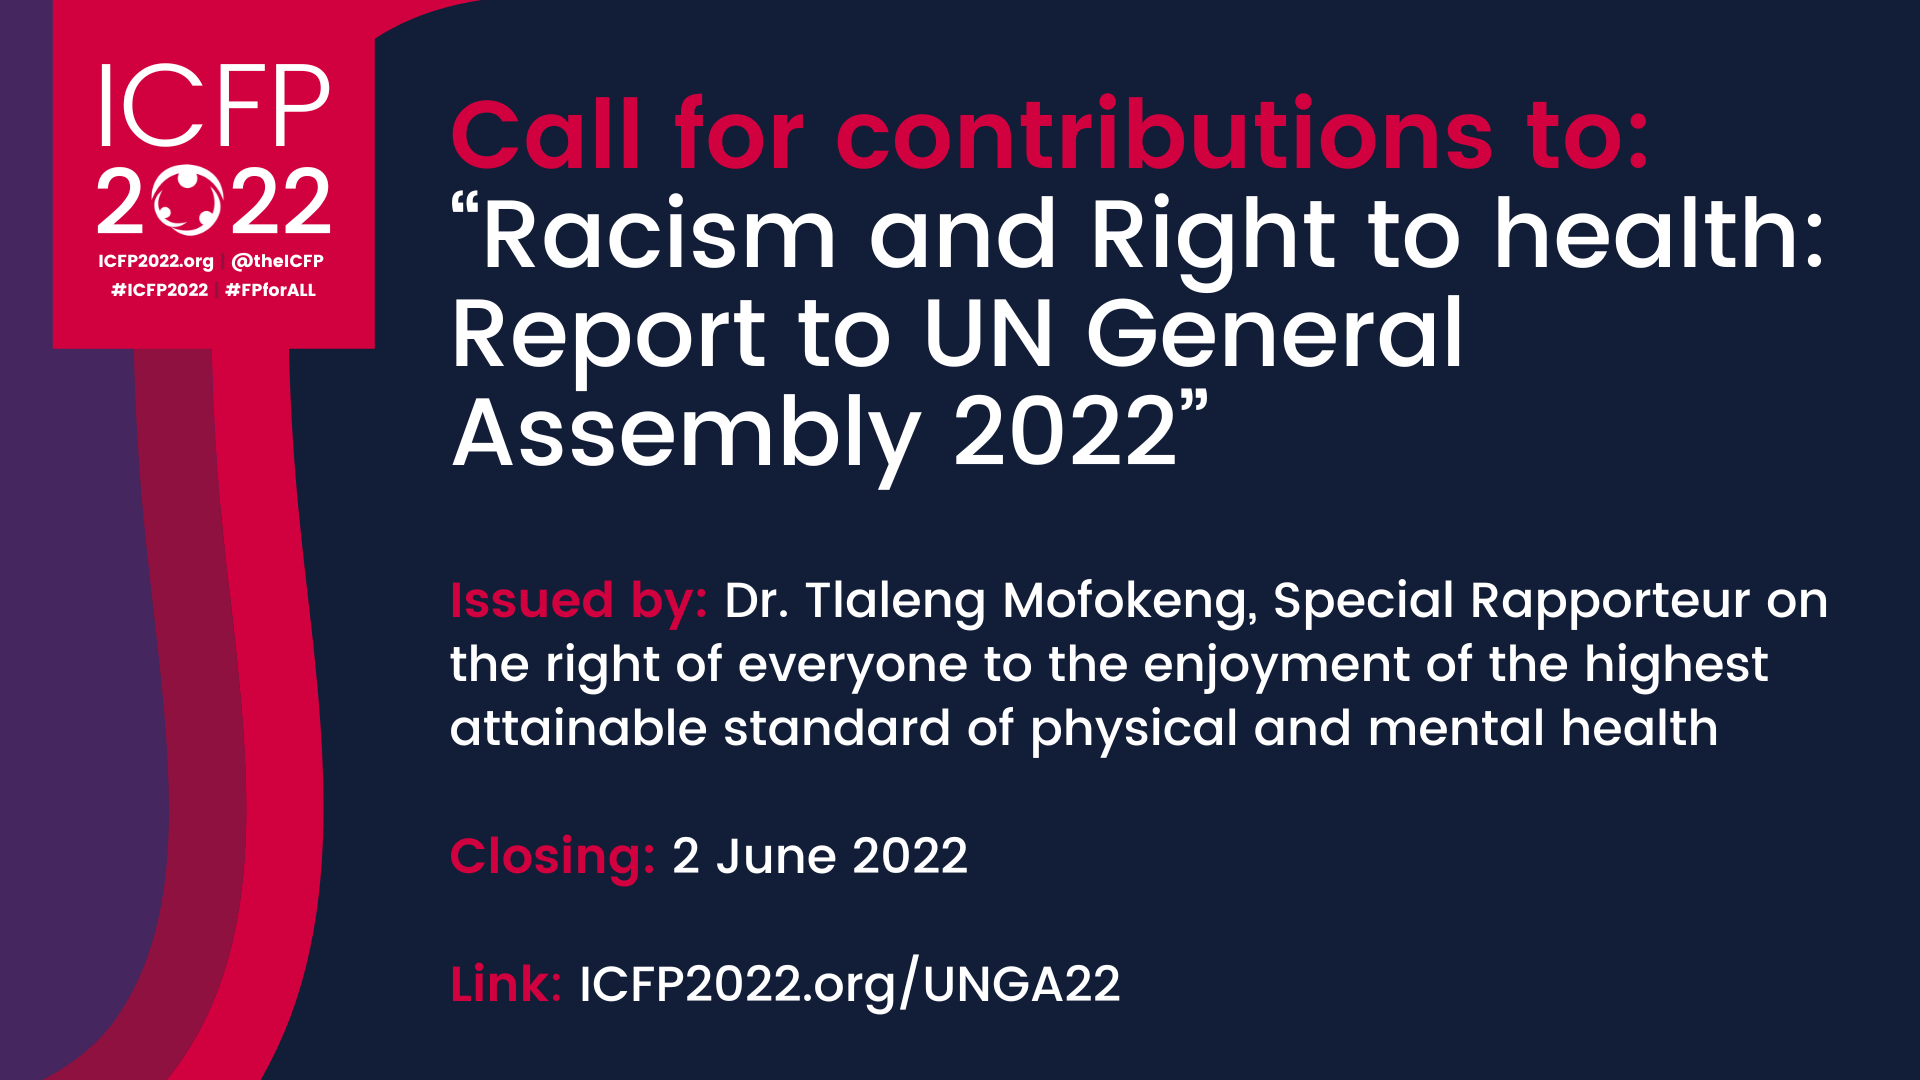 Call for Contributions: “Racism and Right to health: Report to UN General Assembly 2022”